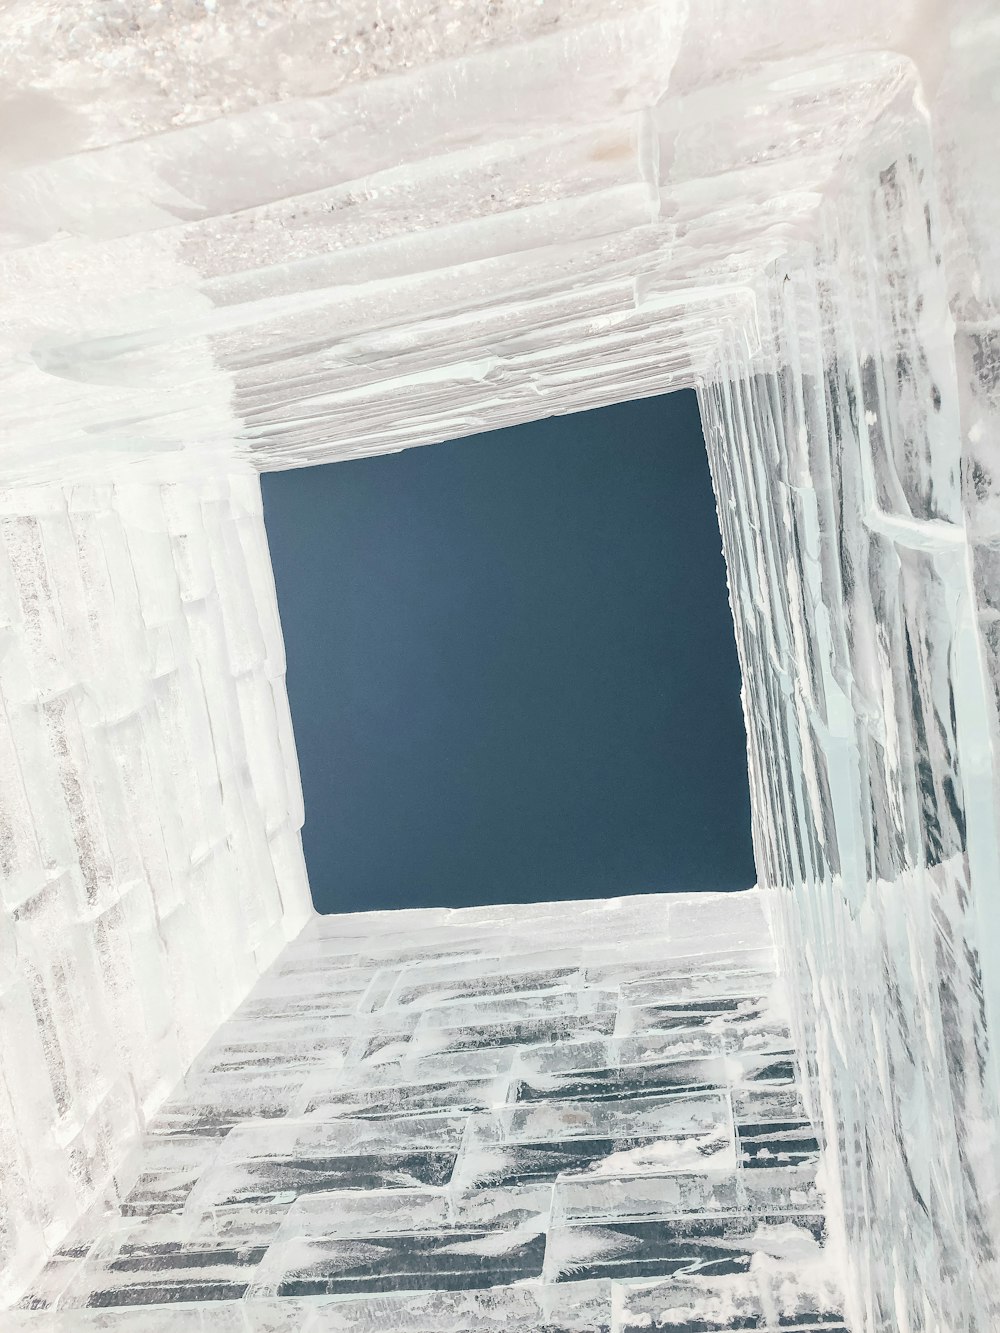 a room that has ice on the walls